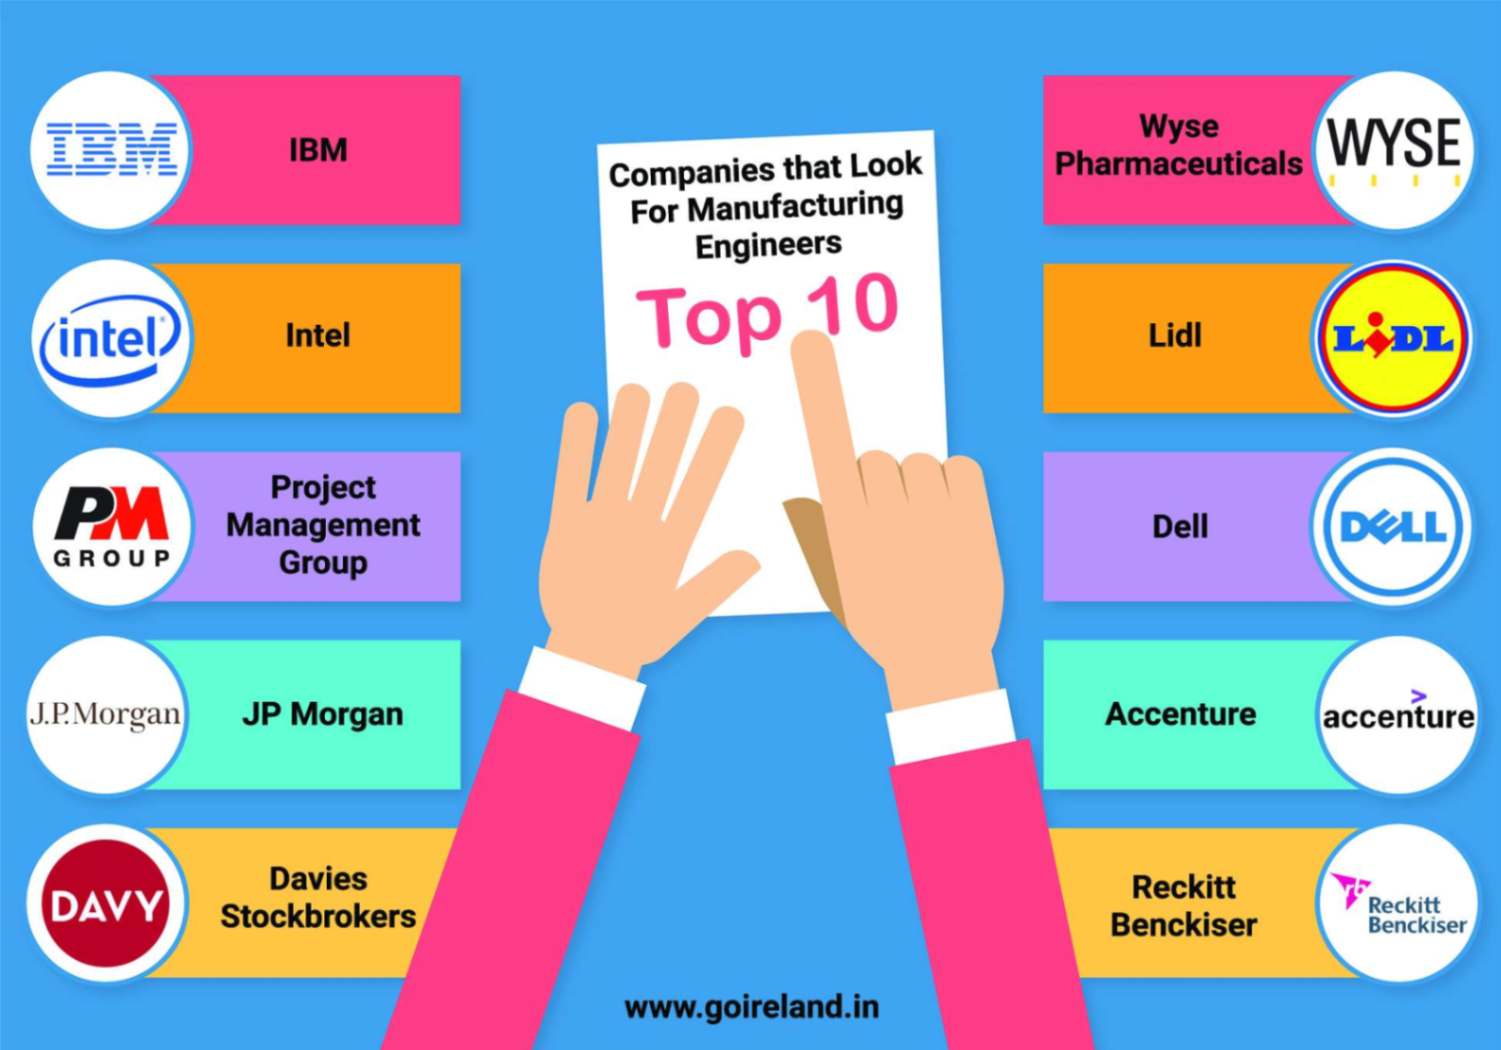 Top 10 Companies that Look for Manufacturing Engineers